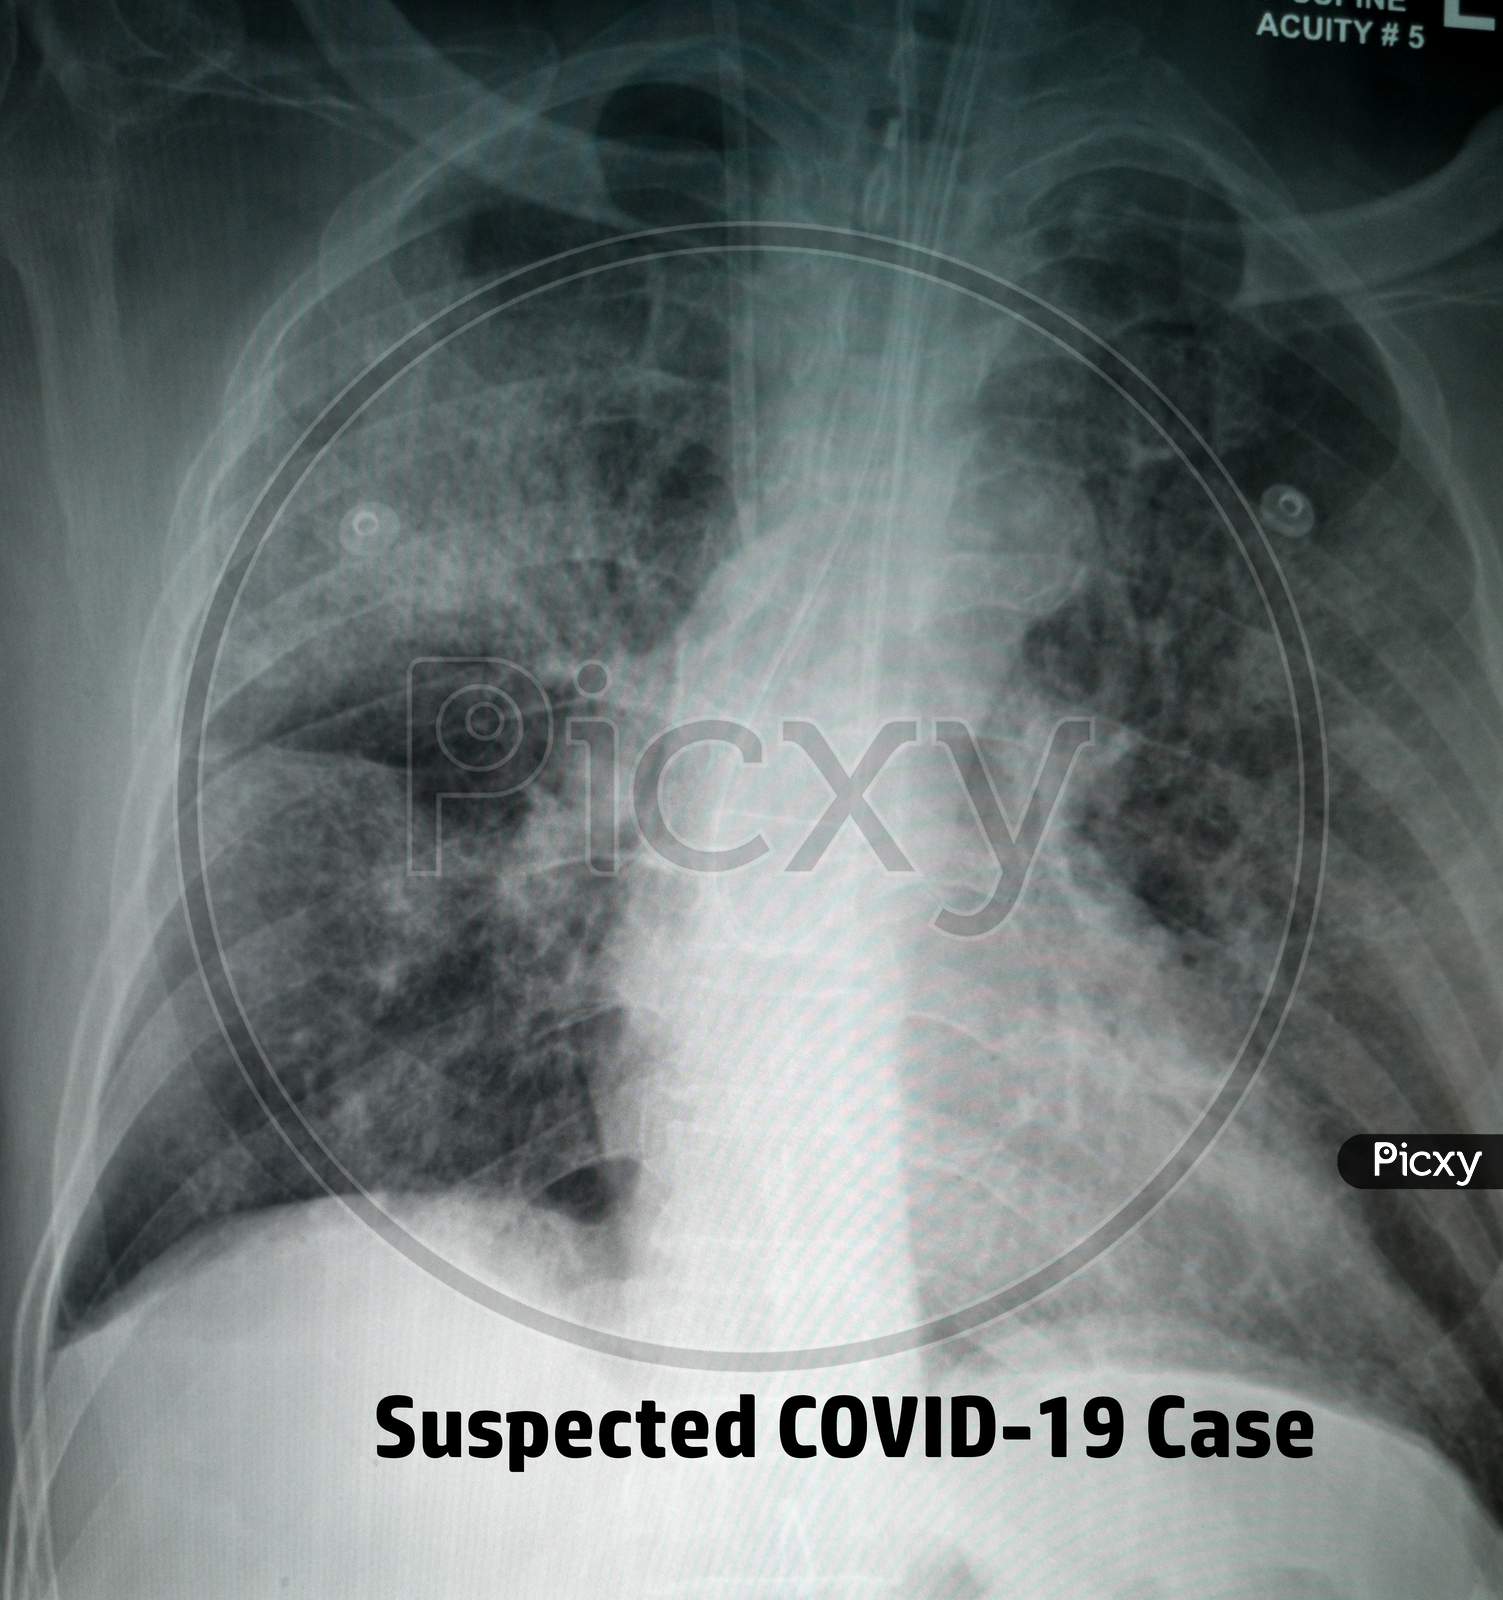 Chest X-Ray of suspected Corona virus patient high quality image showing changes in the lung due to Covid-19 virus with chest tubes